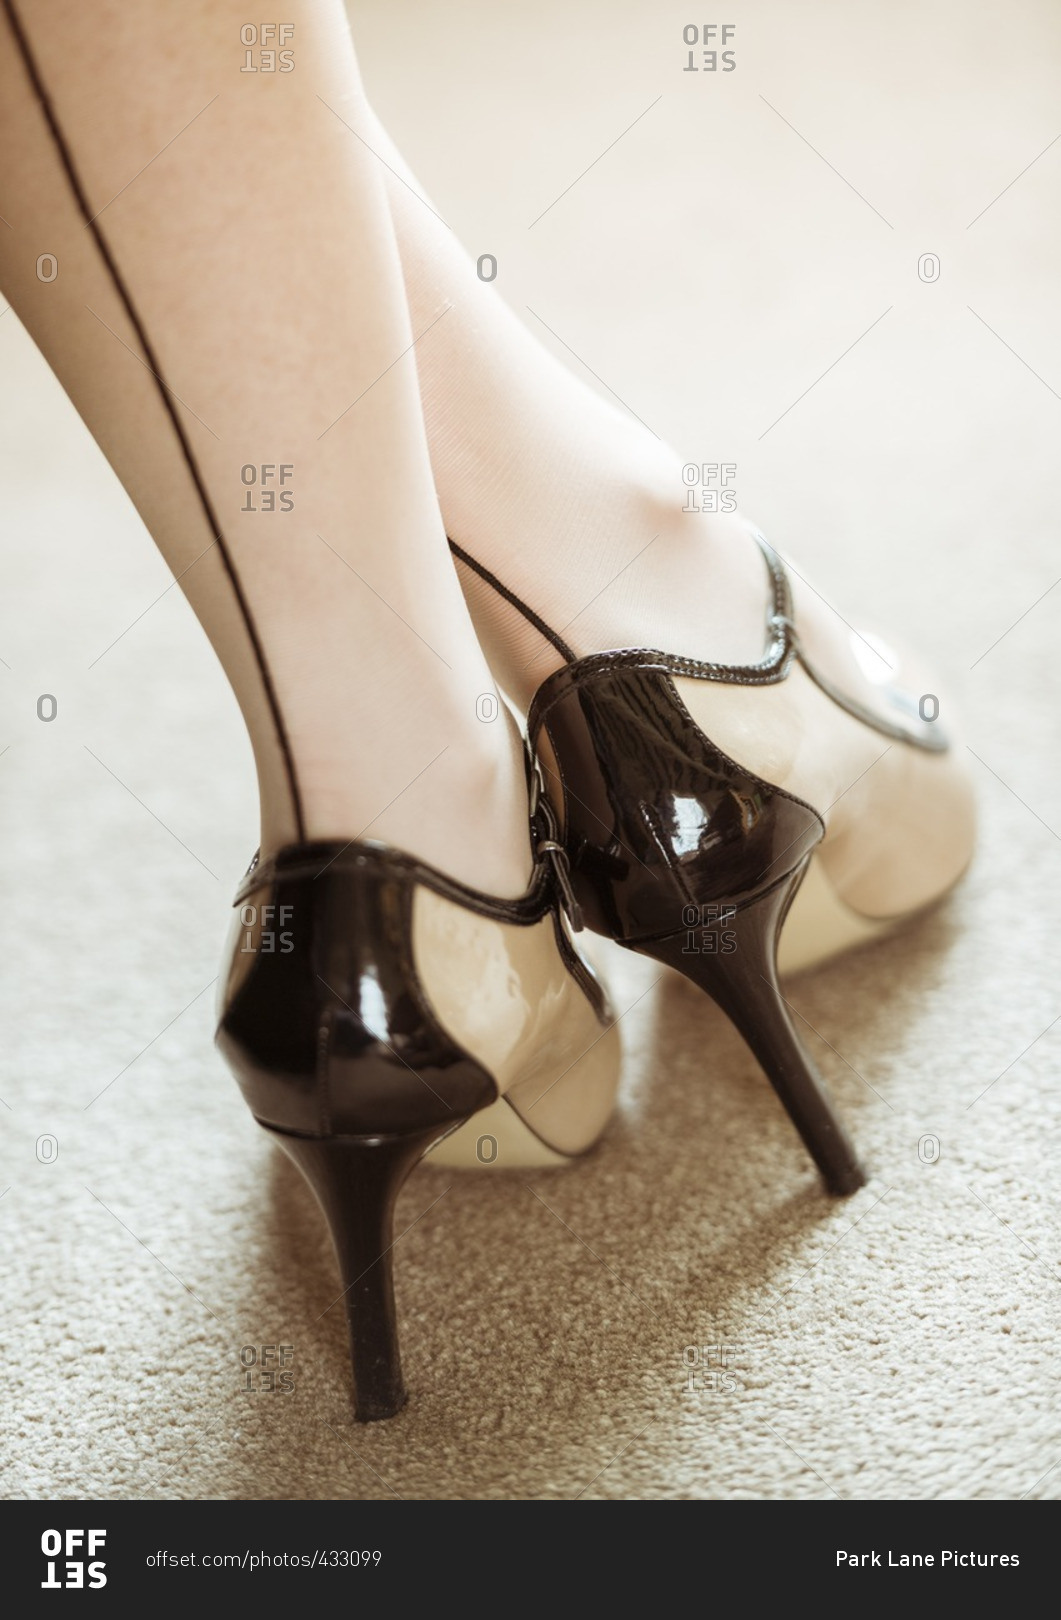 Seamed Stockings And High Heels Porn Pic's